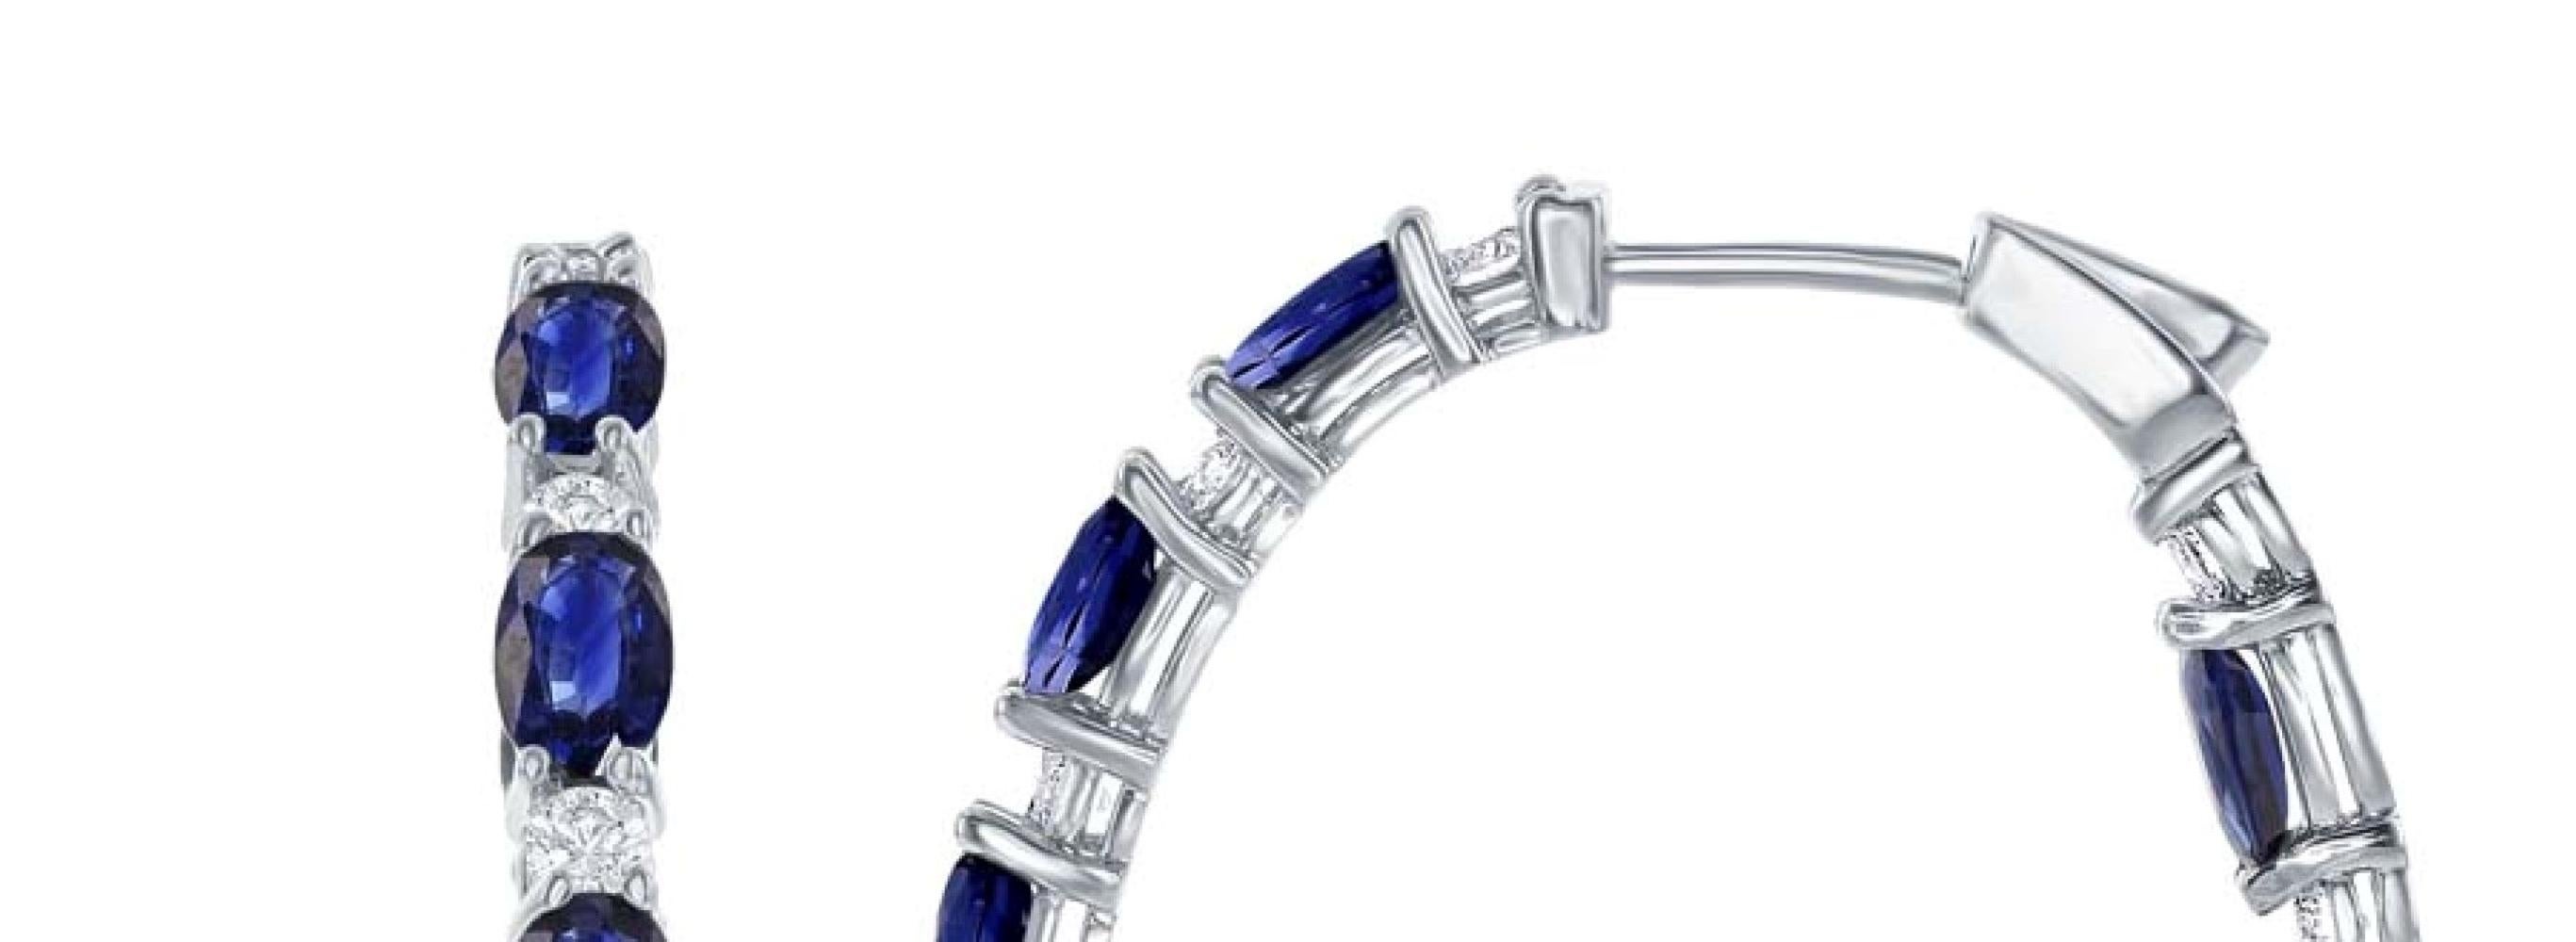 Contemporary In and Out Hoop Earrings, 7.99ct of Sapphire, 1.13ct Diamond in 18kt White Gold For Sale